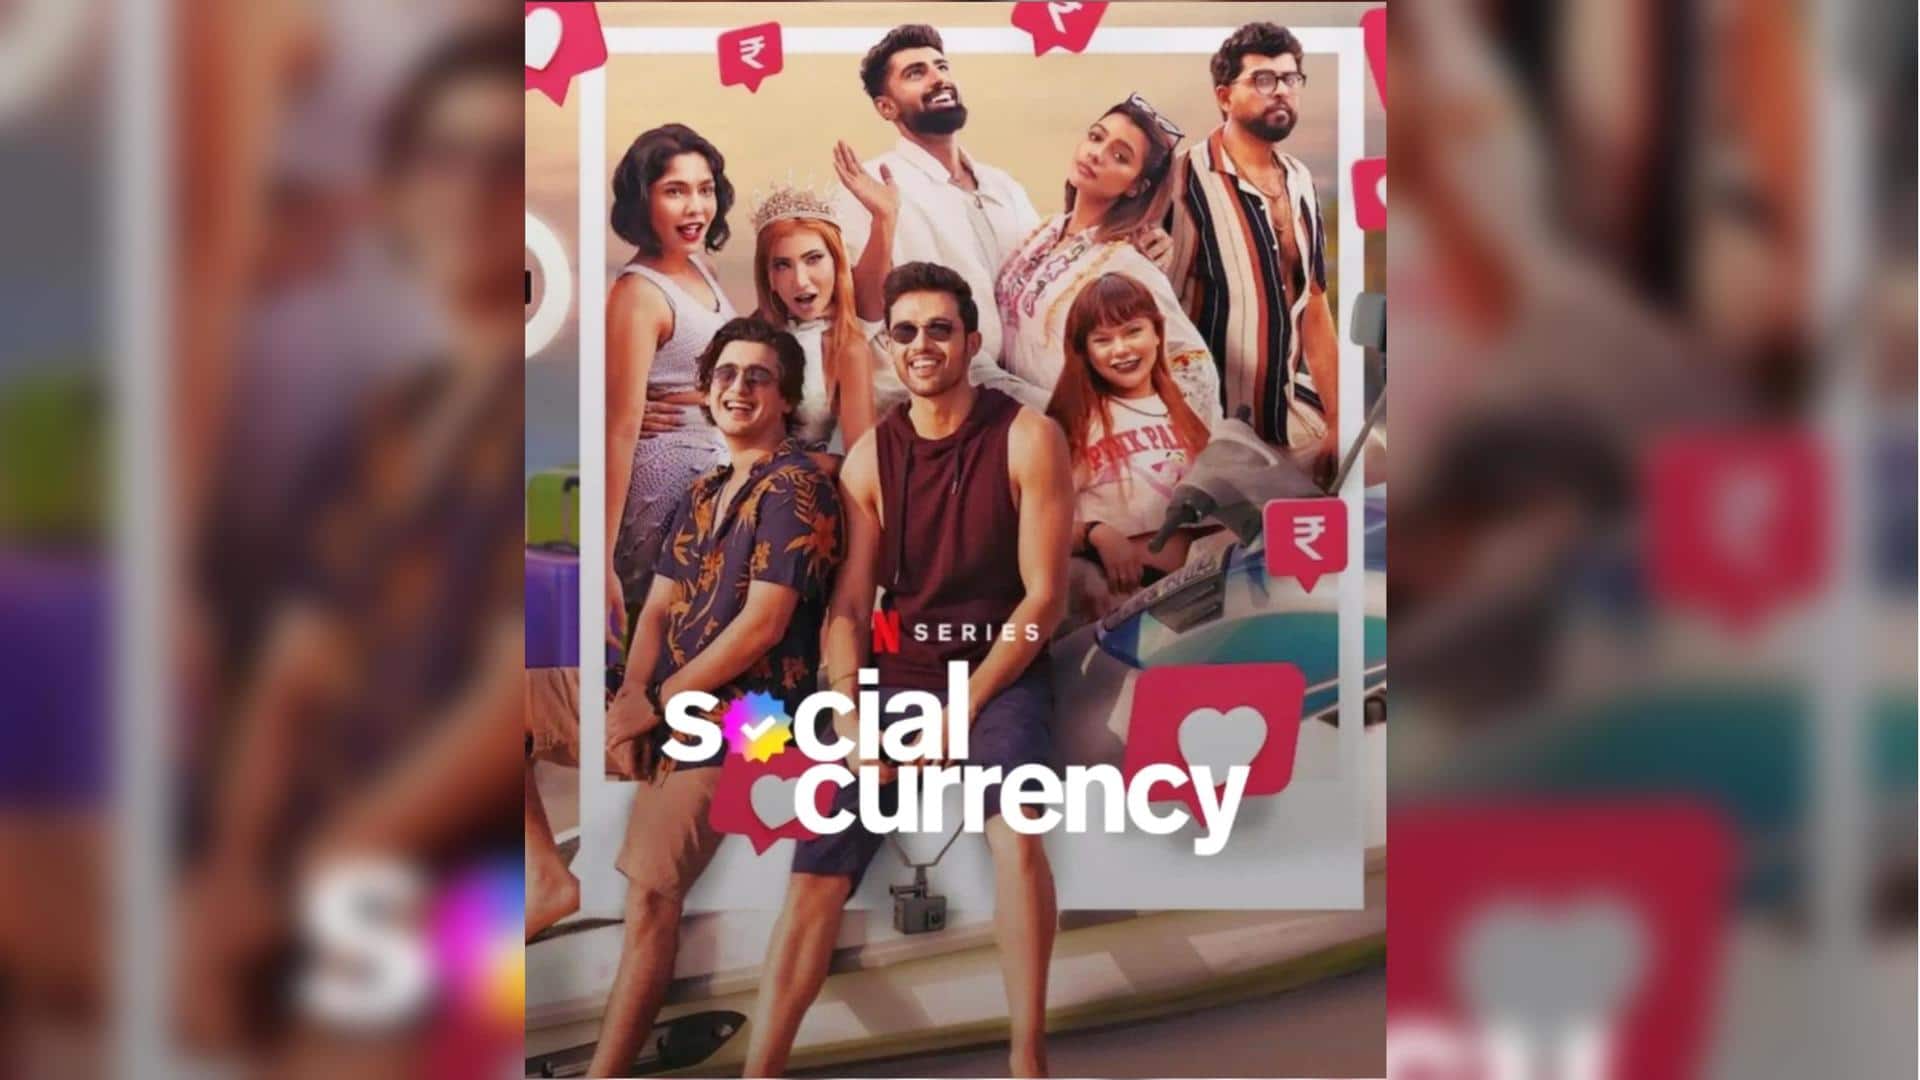 Netflix's 'Social Currency': Know all about the contestants, their careers